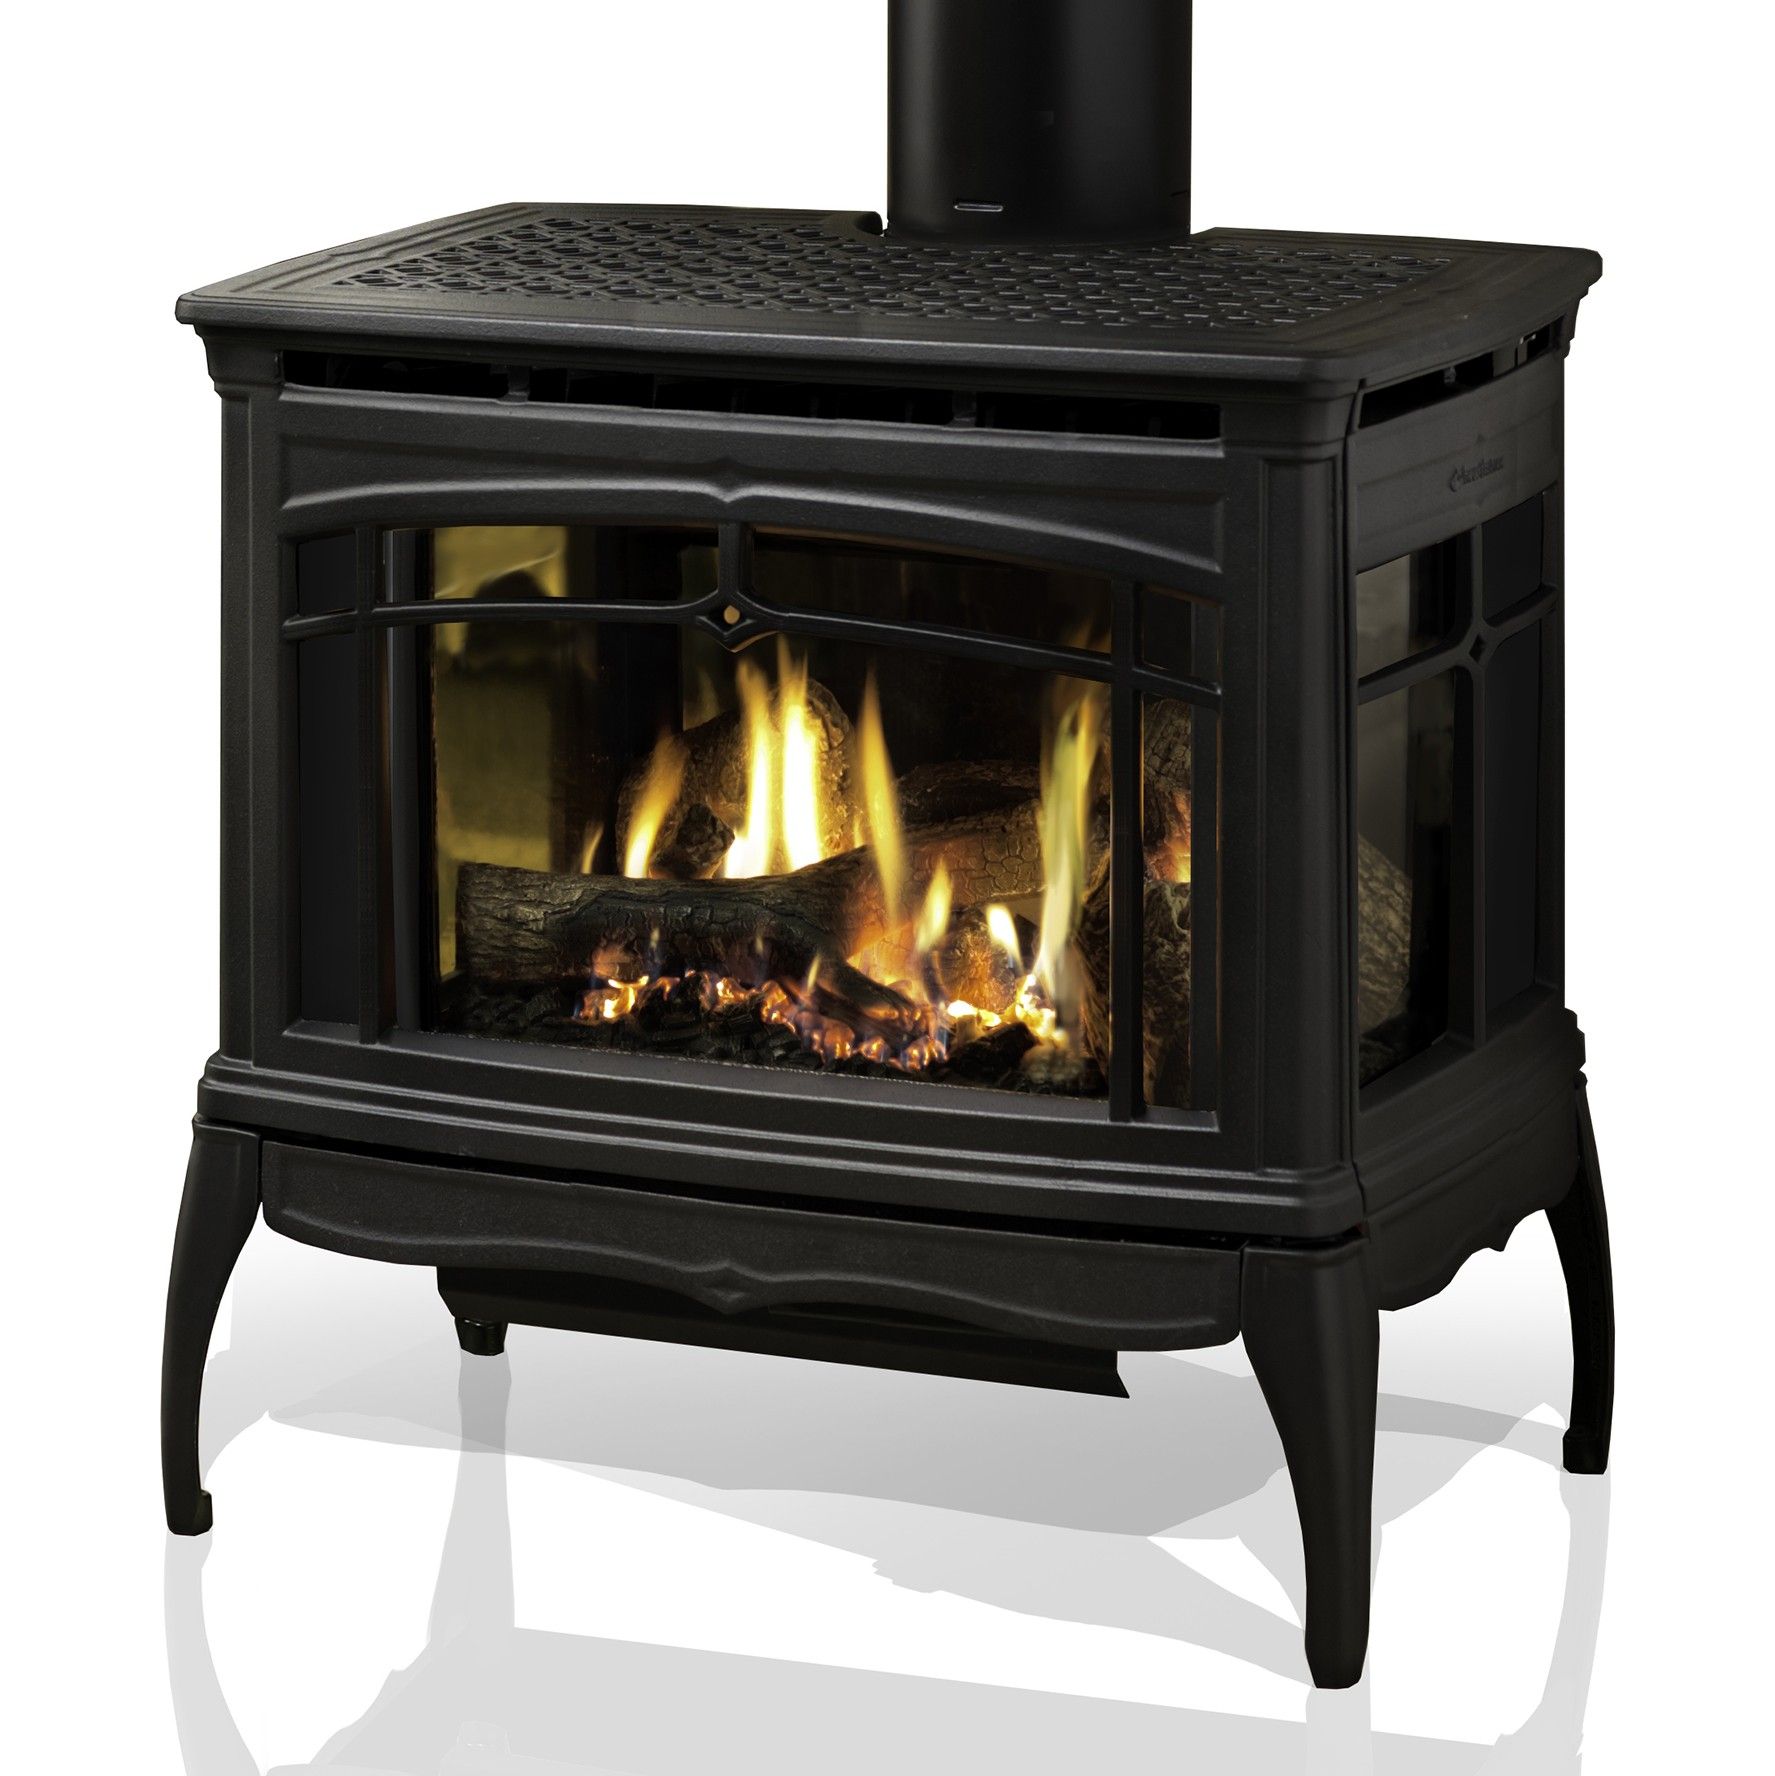 Wood Burning Fireplace for Sale Inspirational Hearthstone Waitsfield Dx 8770 Gas Stove